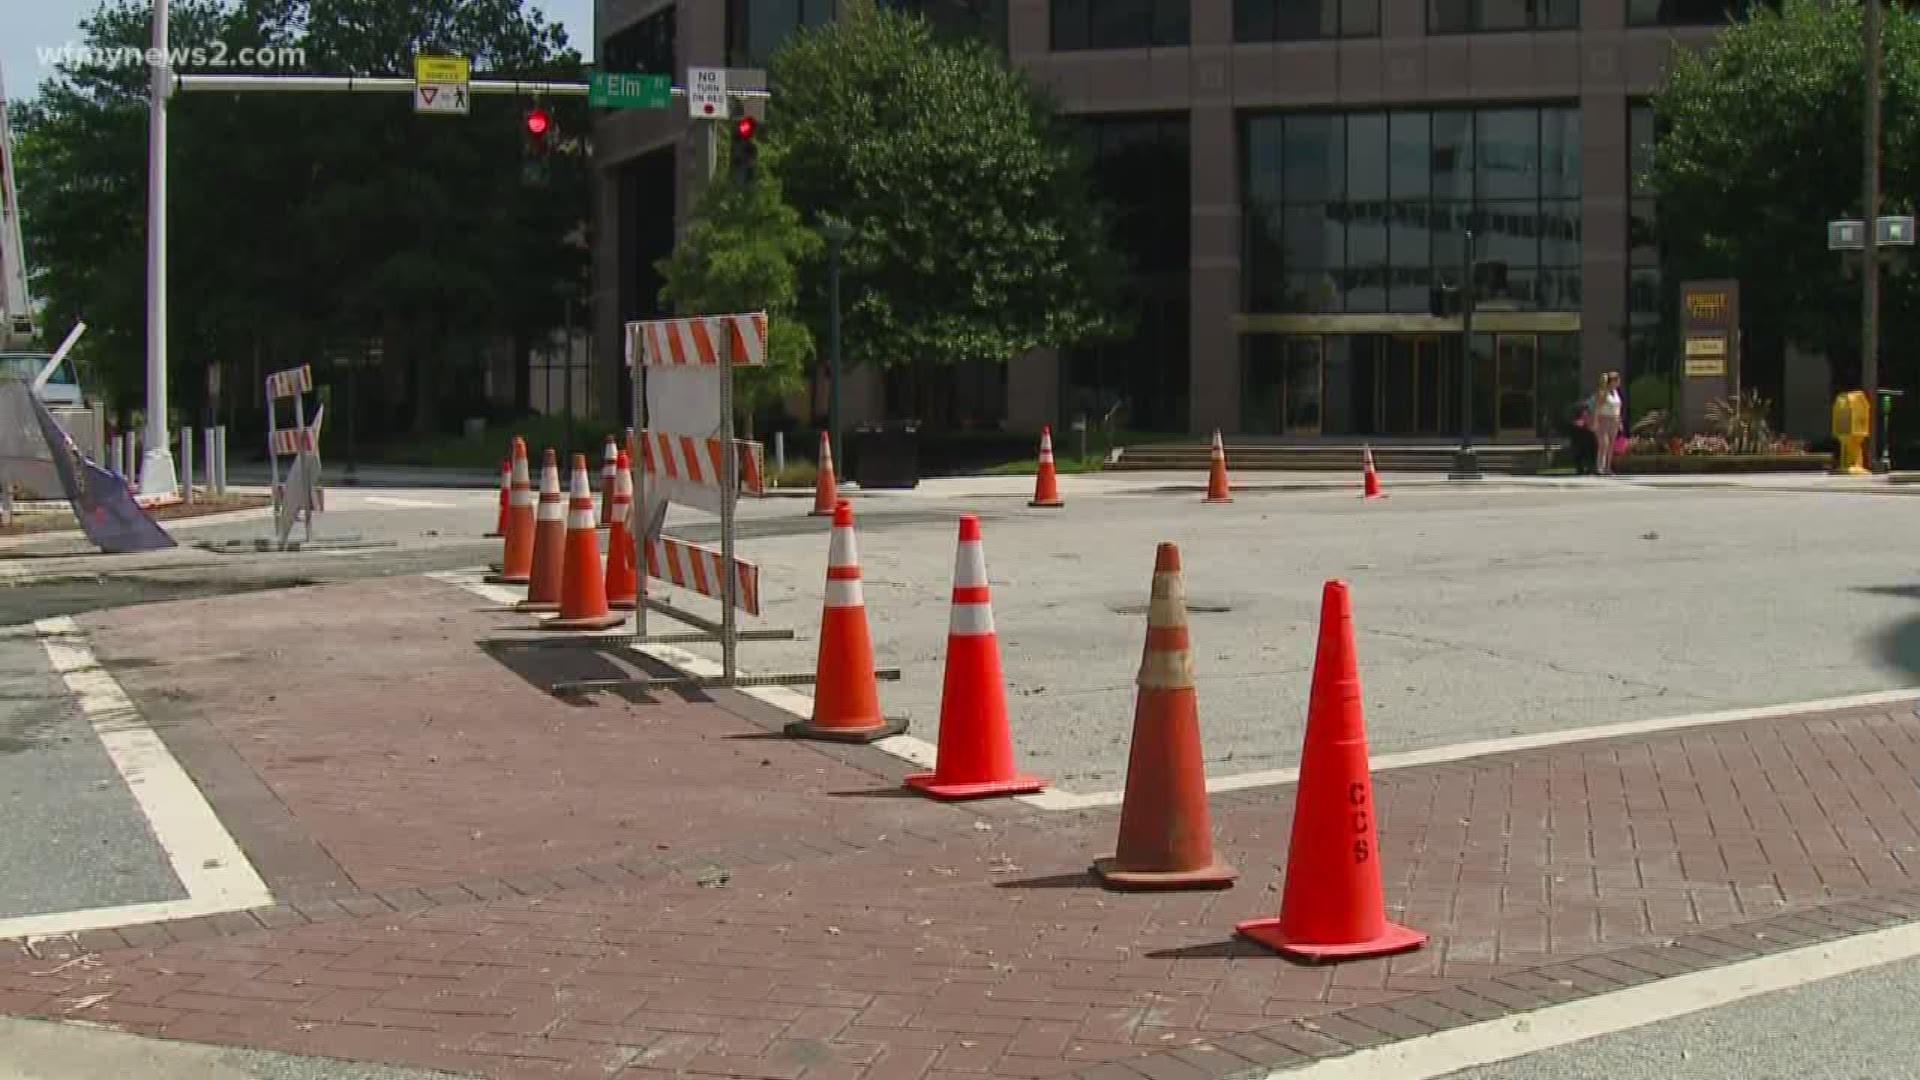 New sidewalks, sewer improvements and accessible curb ramps are just some of the upgrades coming to Greensboro.